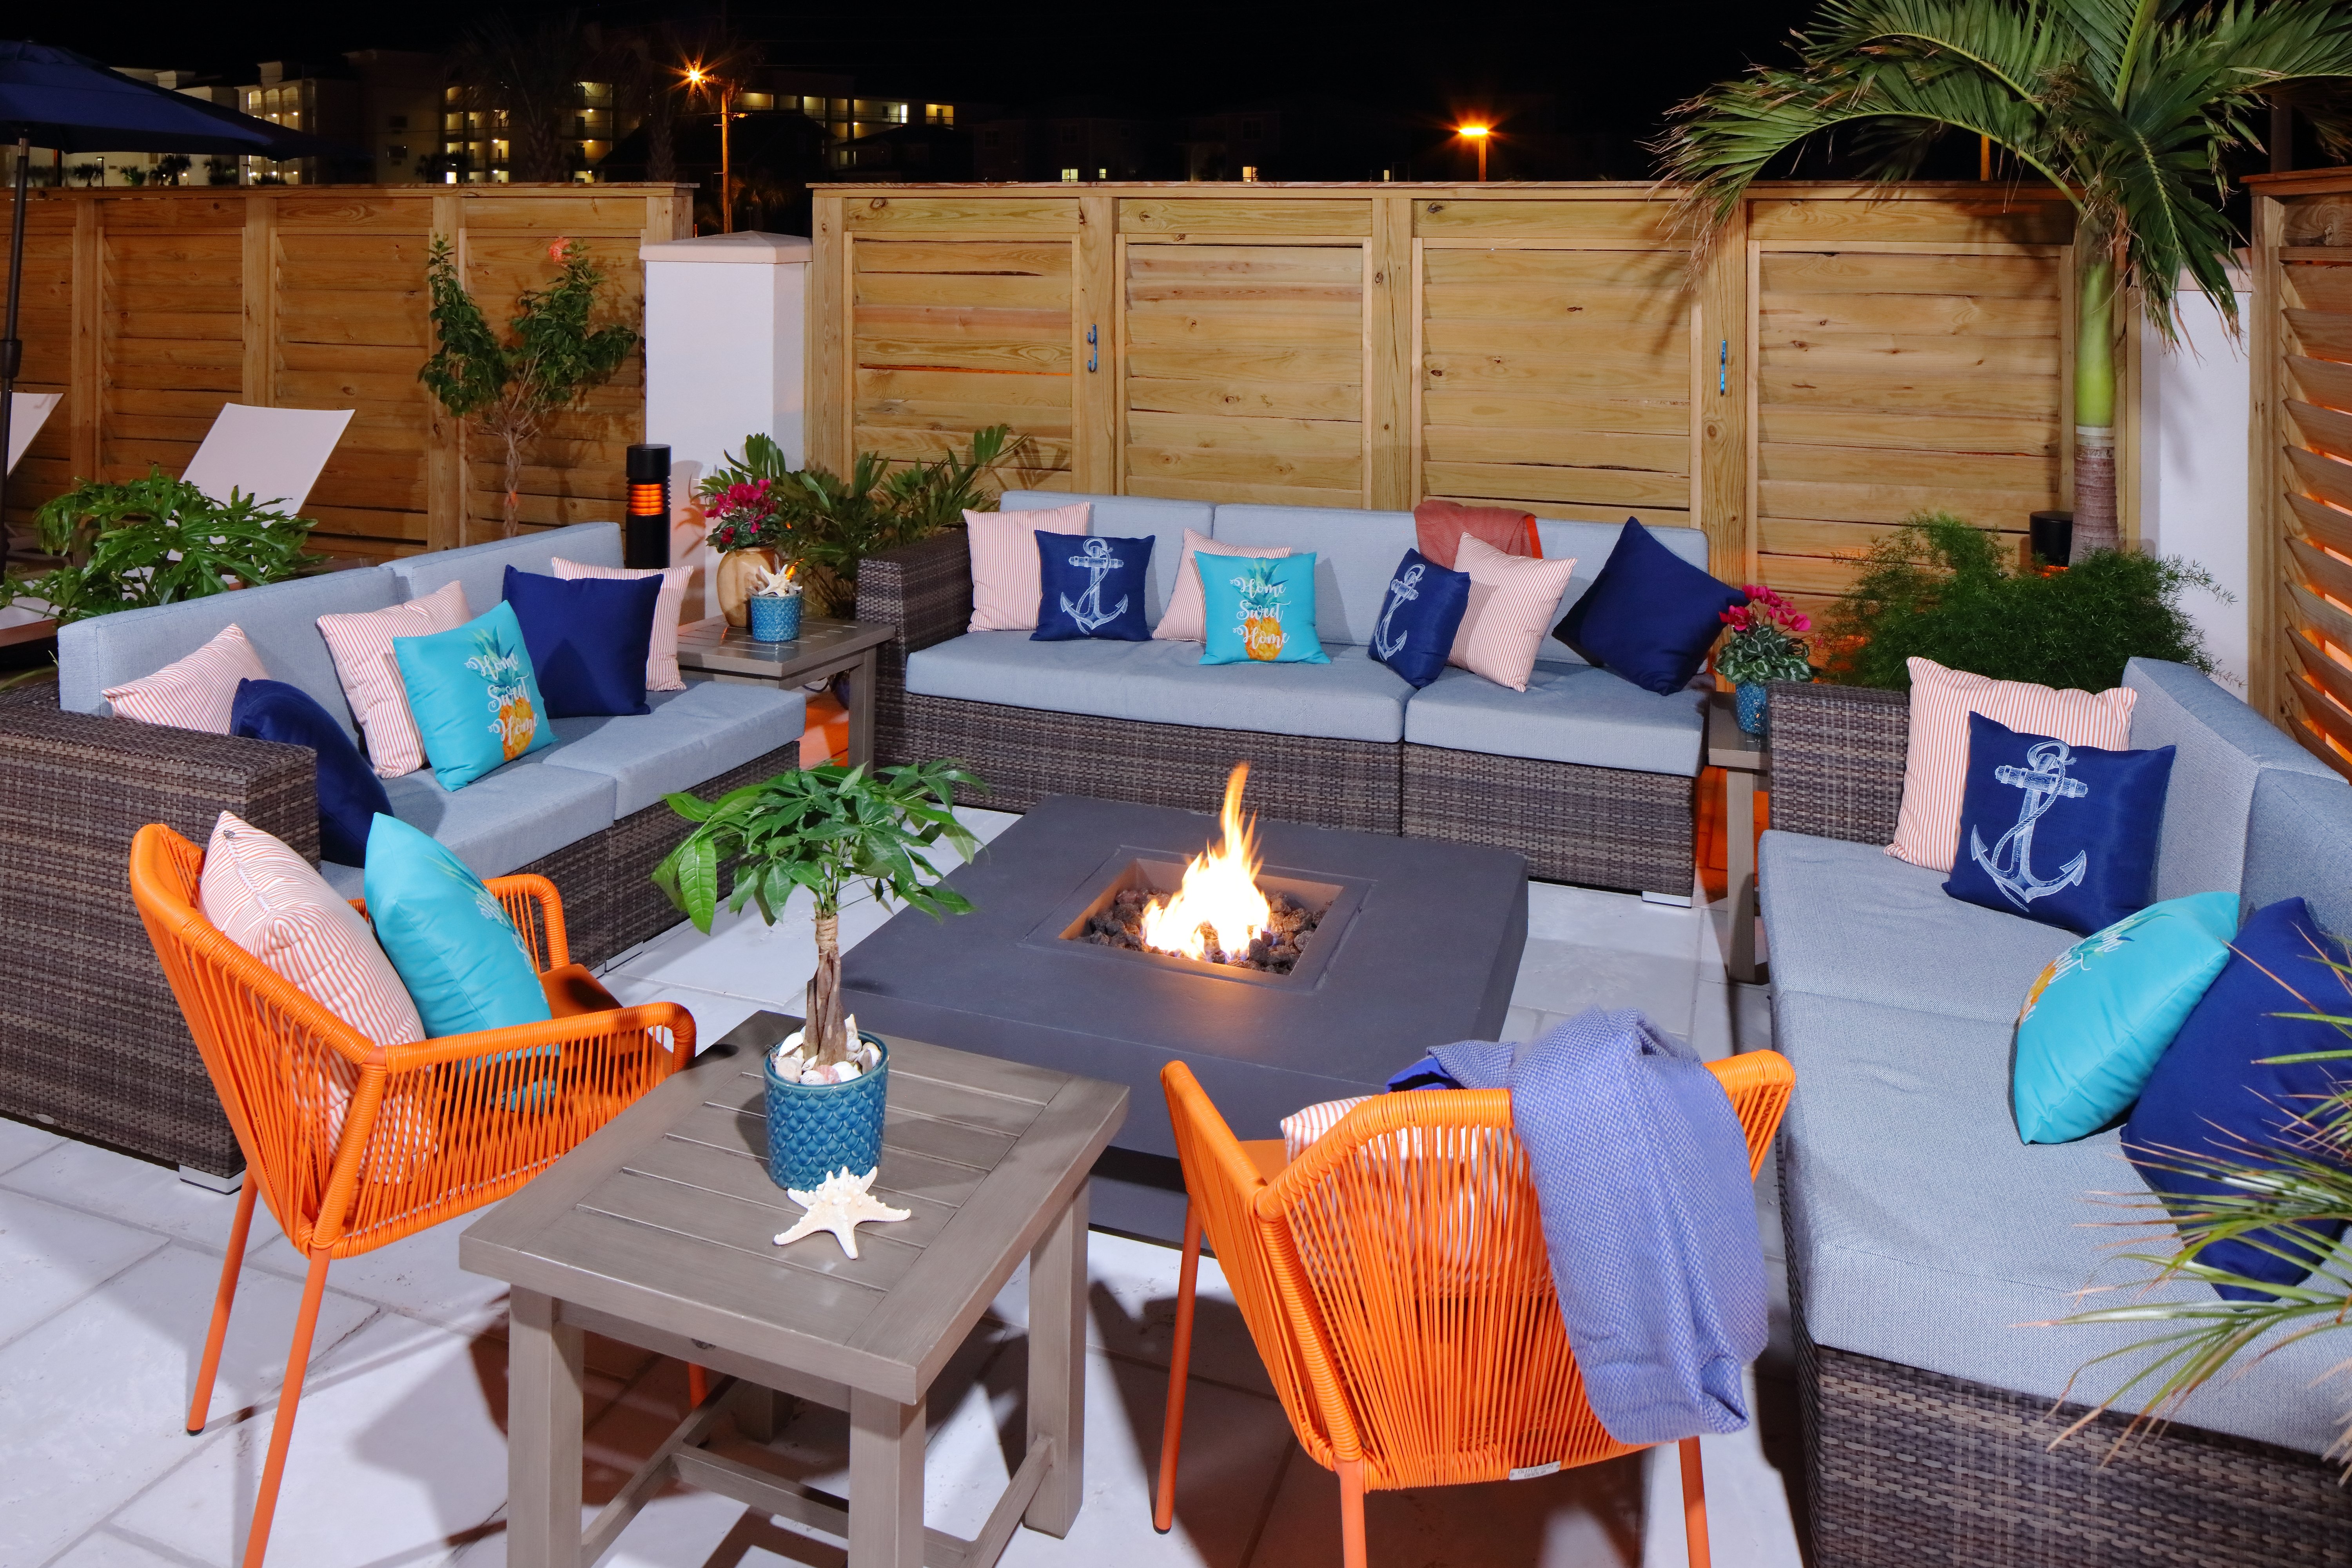 Outdoor Fire Pit in the Courtyard with Pillows & Blankets 